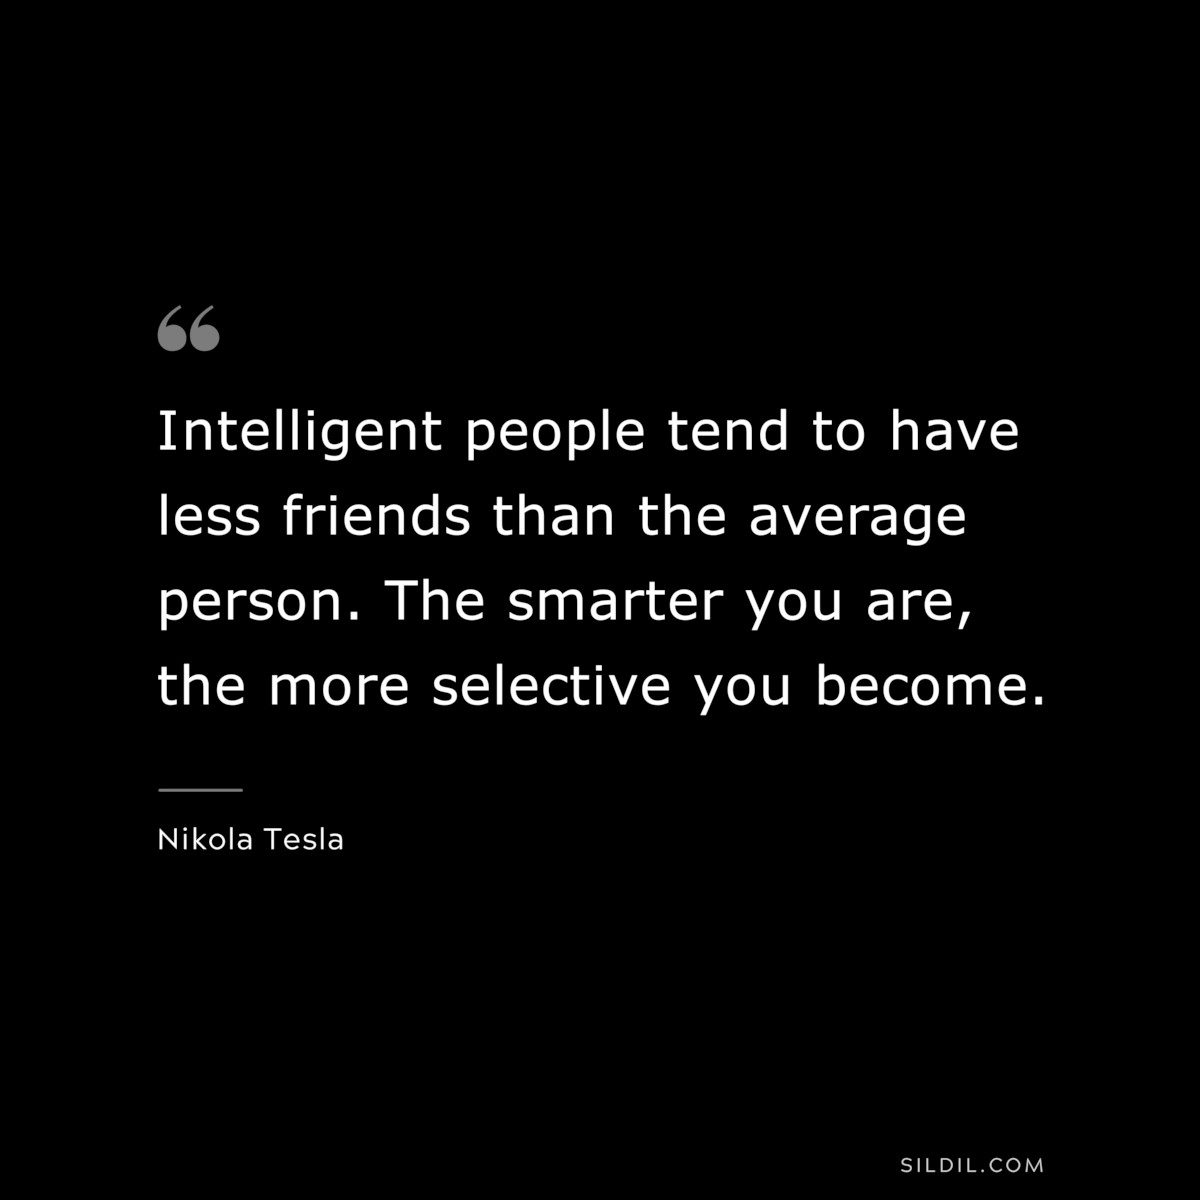 Intelligent people tend to have less friends than the average person. The smarter you are, the more selective you become. ― Nikola Tesla